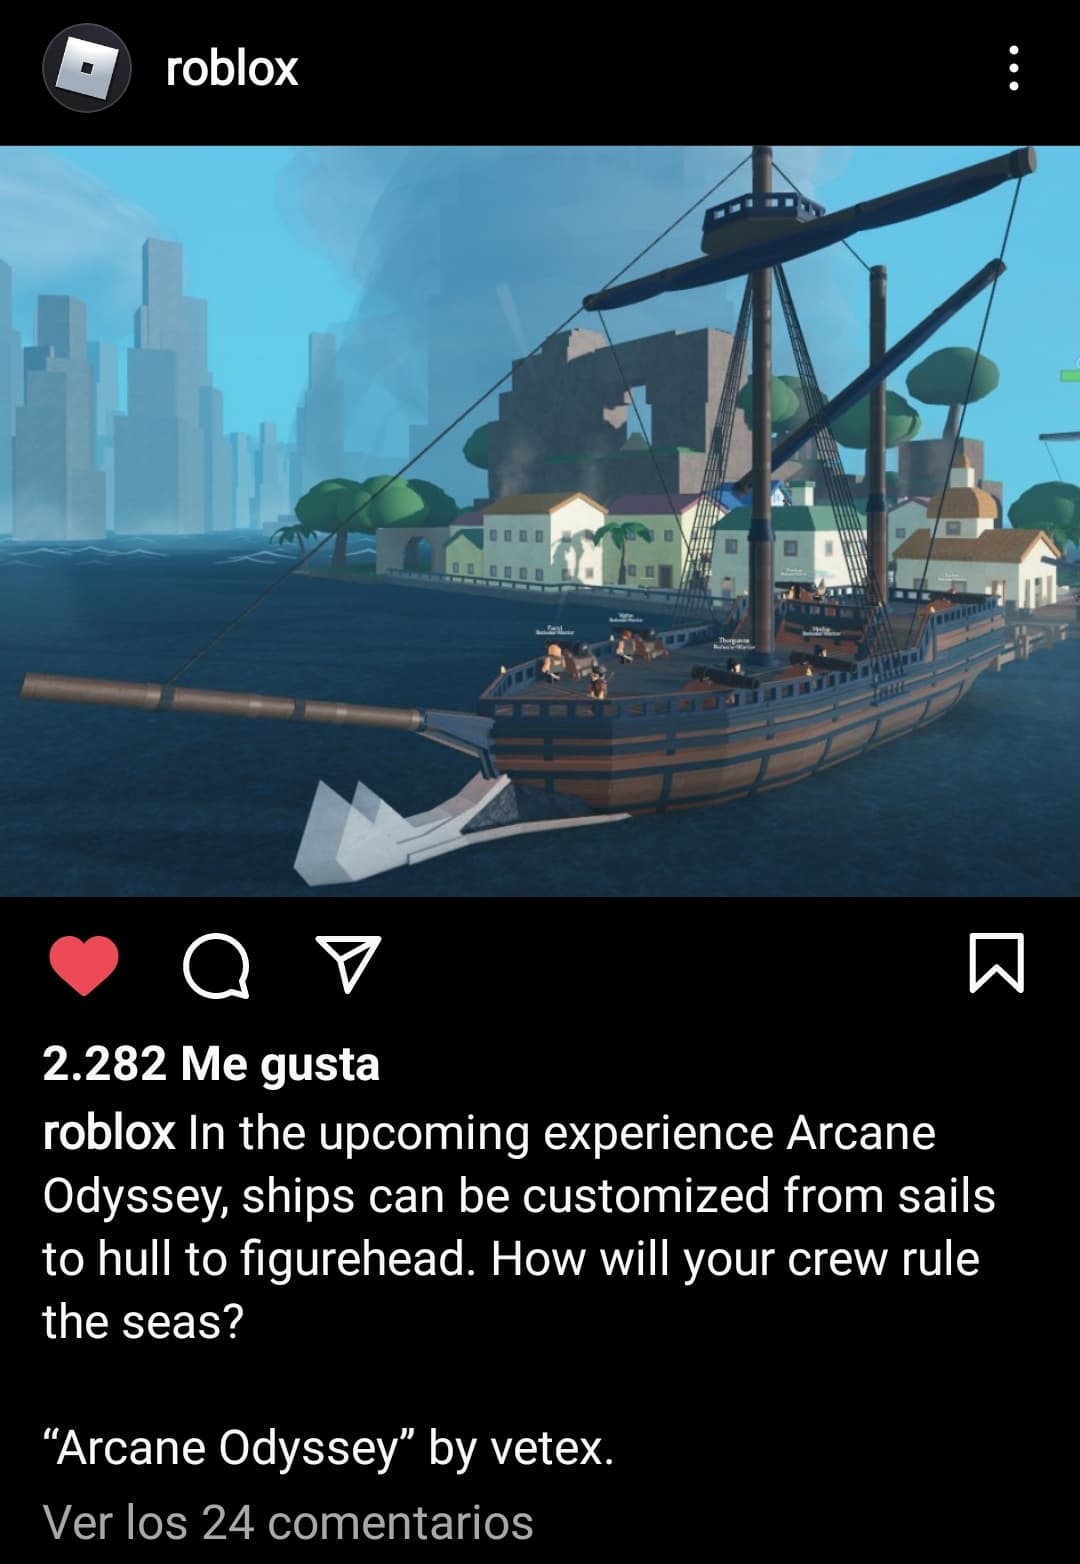 Roblox tweeted about Arcane Odyssey - Game Discussion - Arcane Odyssey